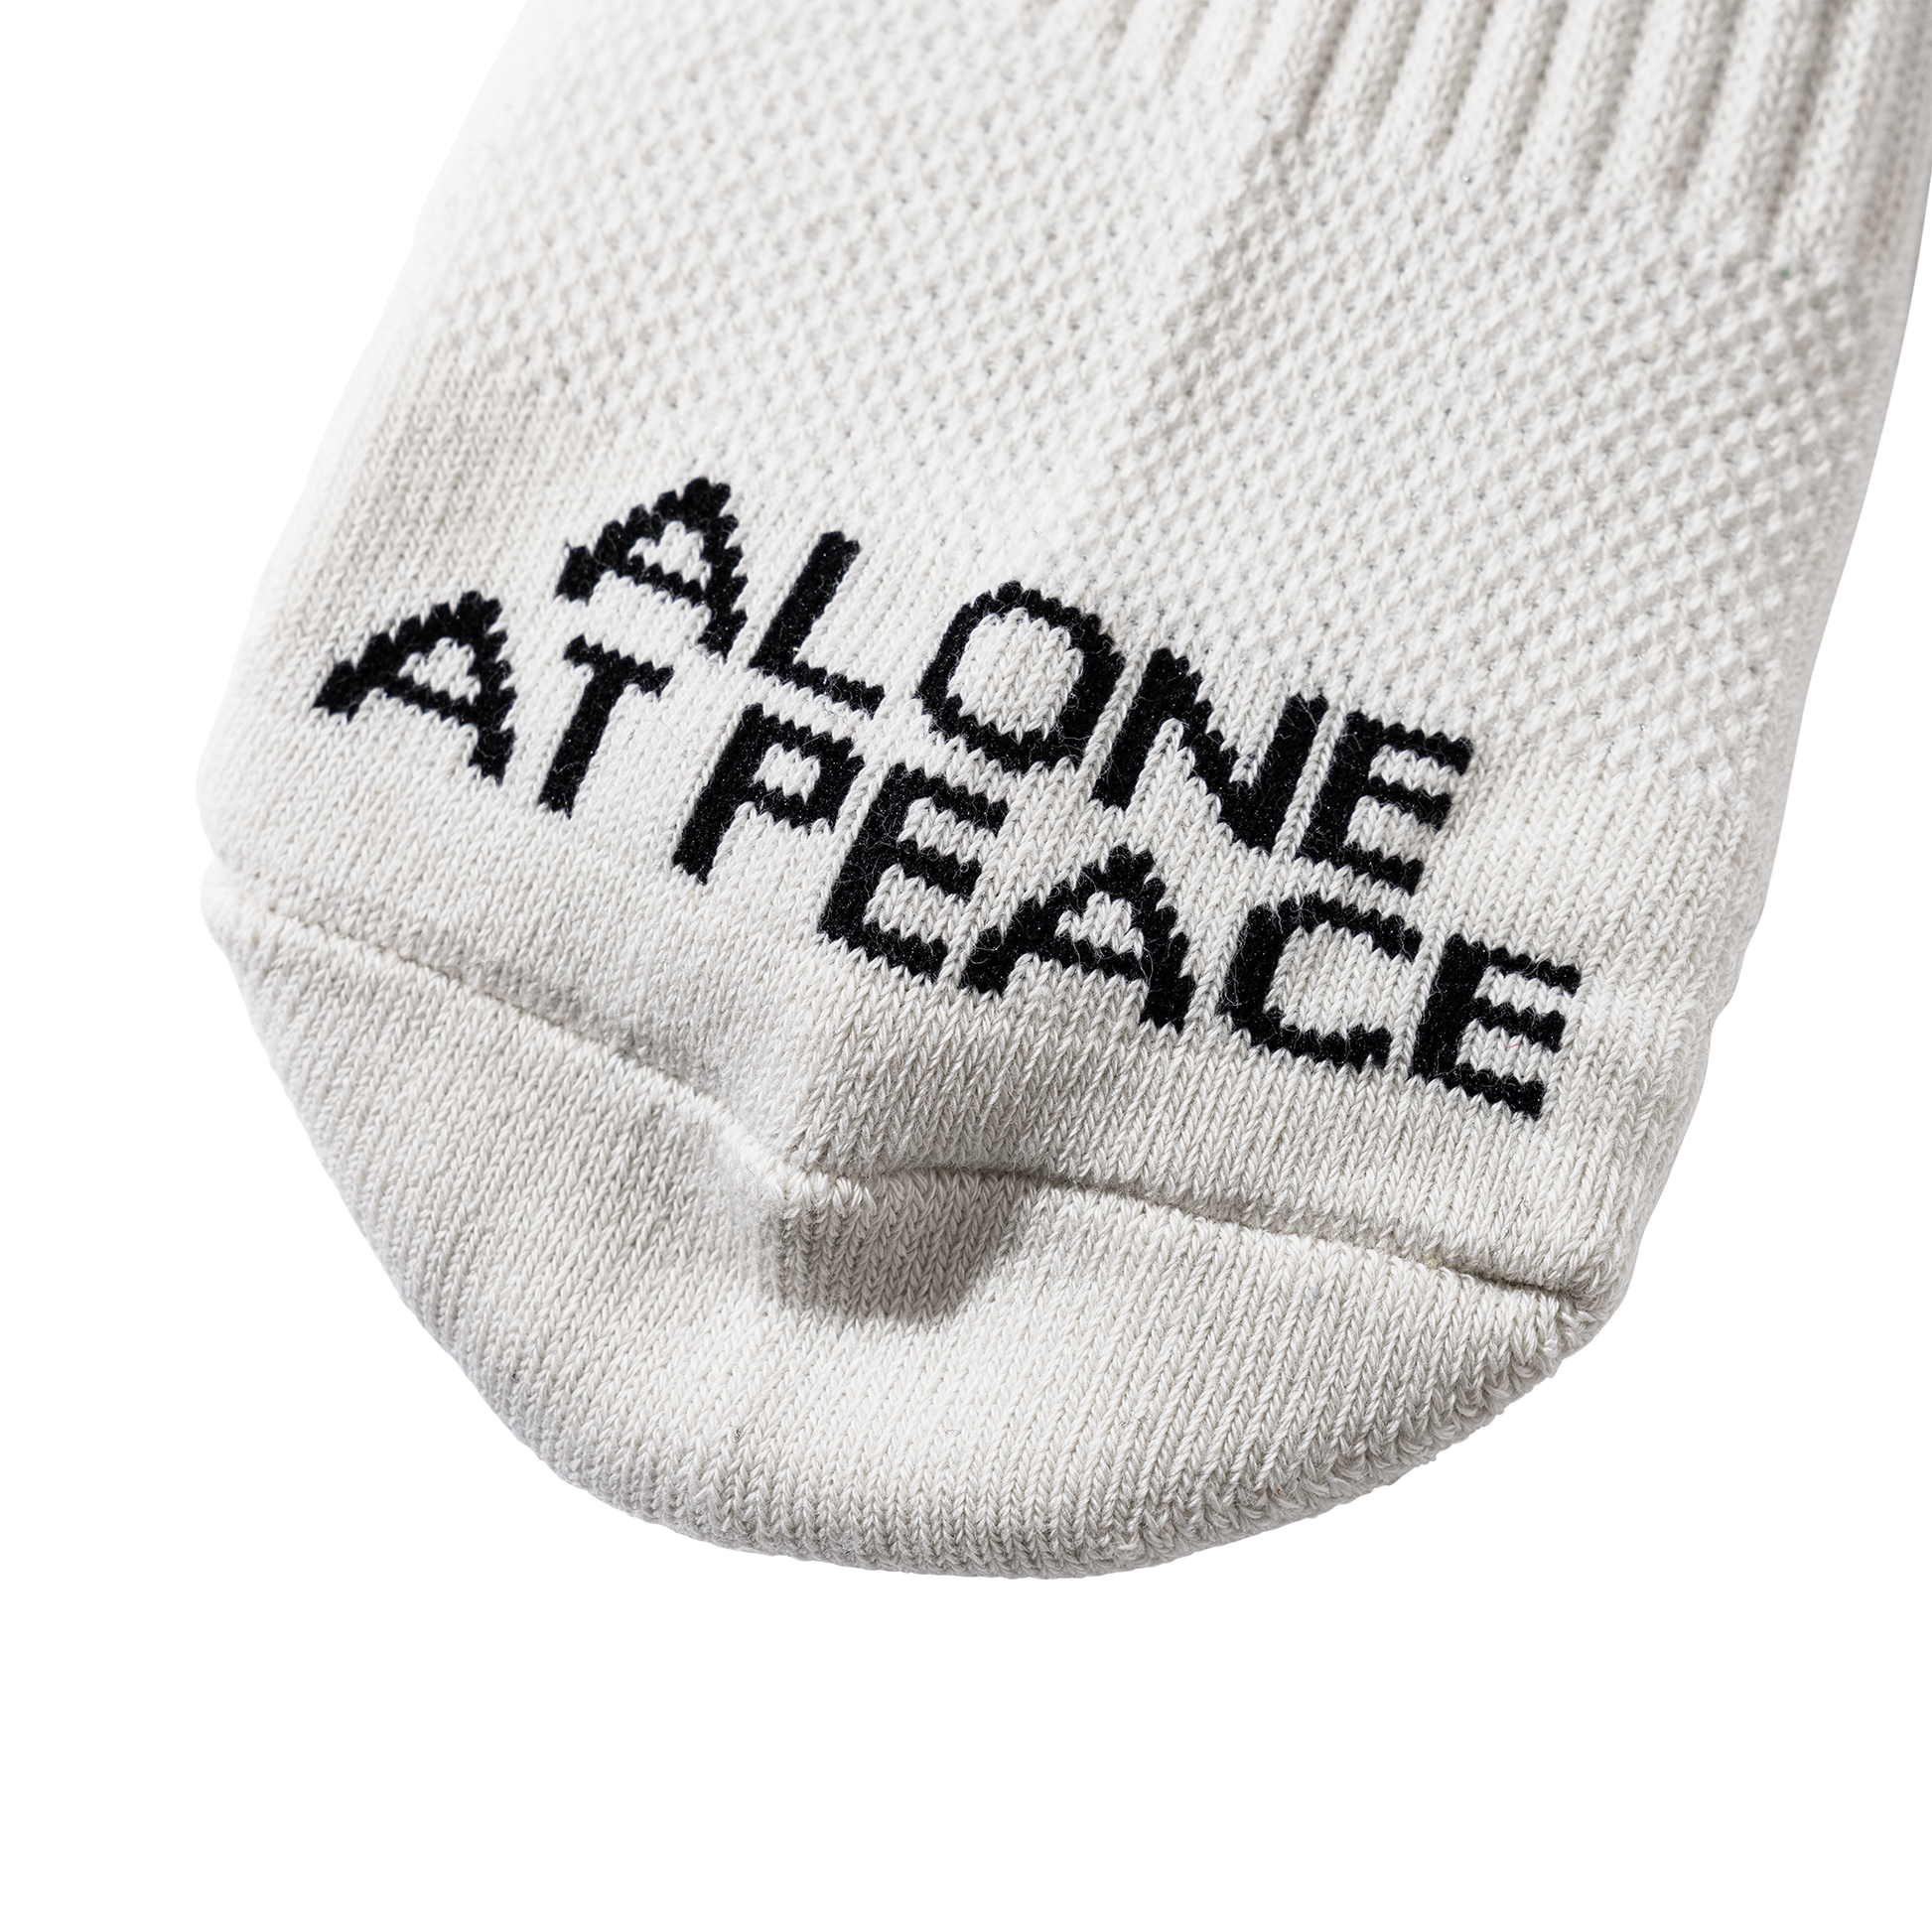 MARKET clothing brand ALONE AT PEACE SOCKS. Find more graphic tees, socks, hats and small goods at MarketStudios.com. Formally Chinatown Market. 